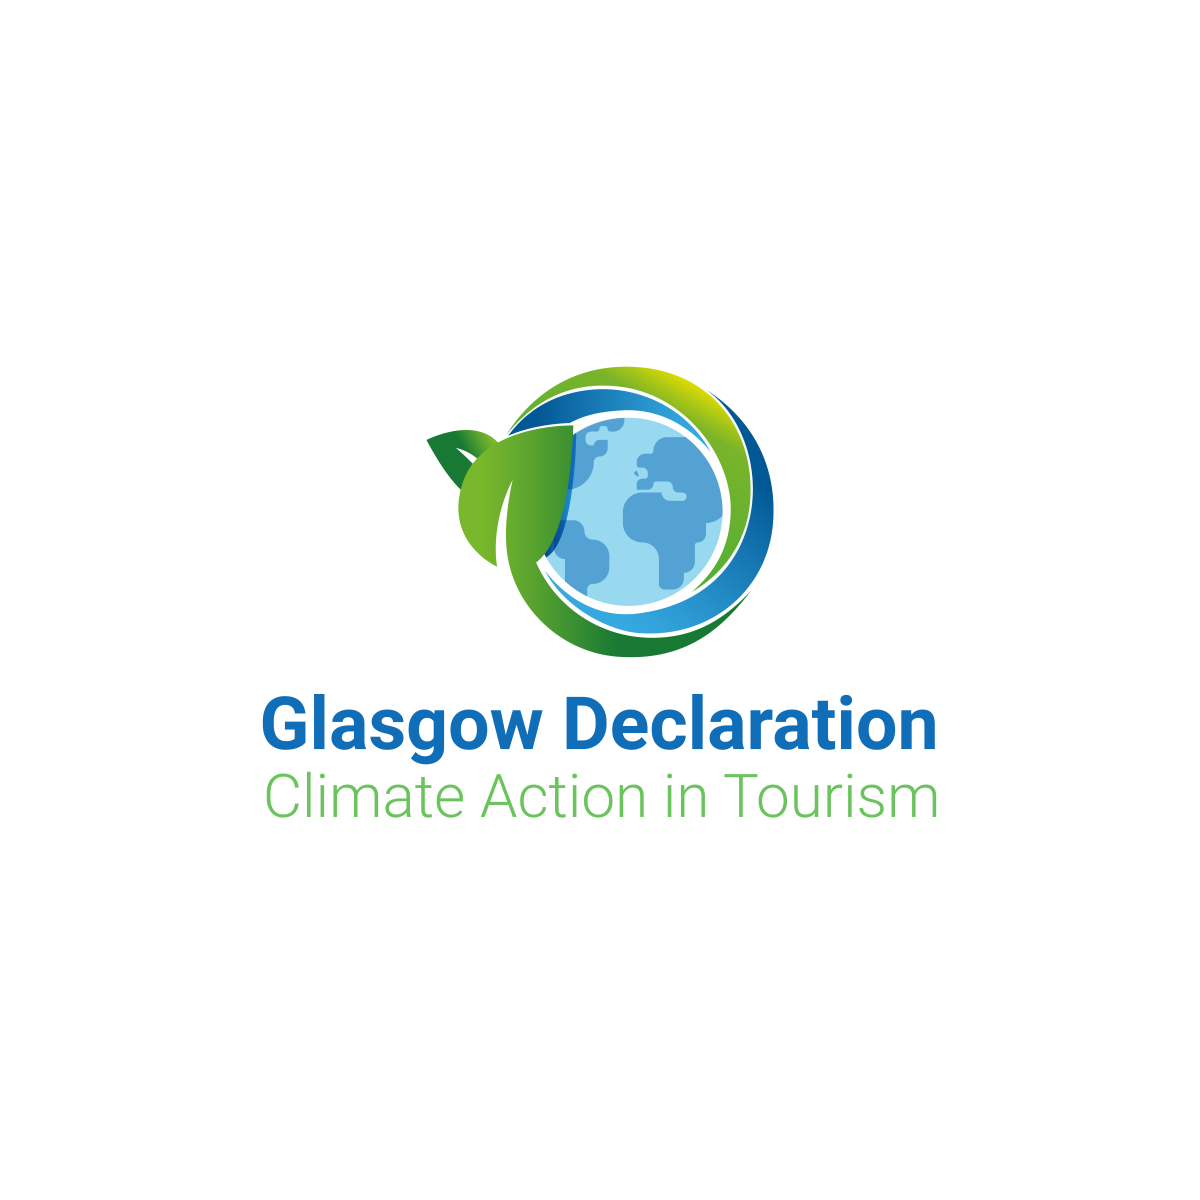 Adherence to the Glasgow Declaration on Climate Action in Tourism